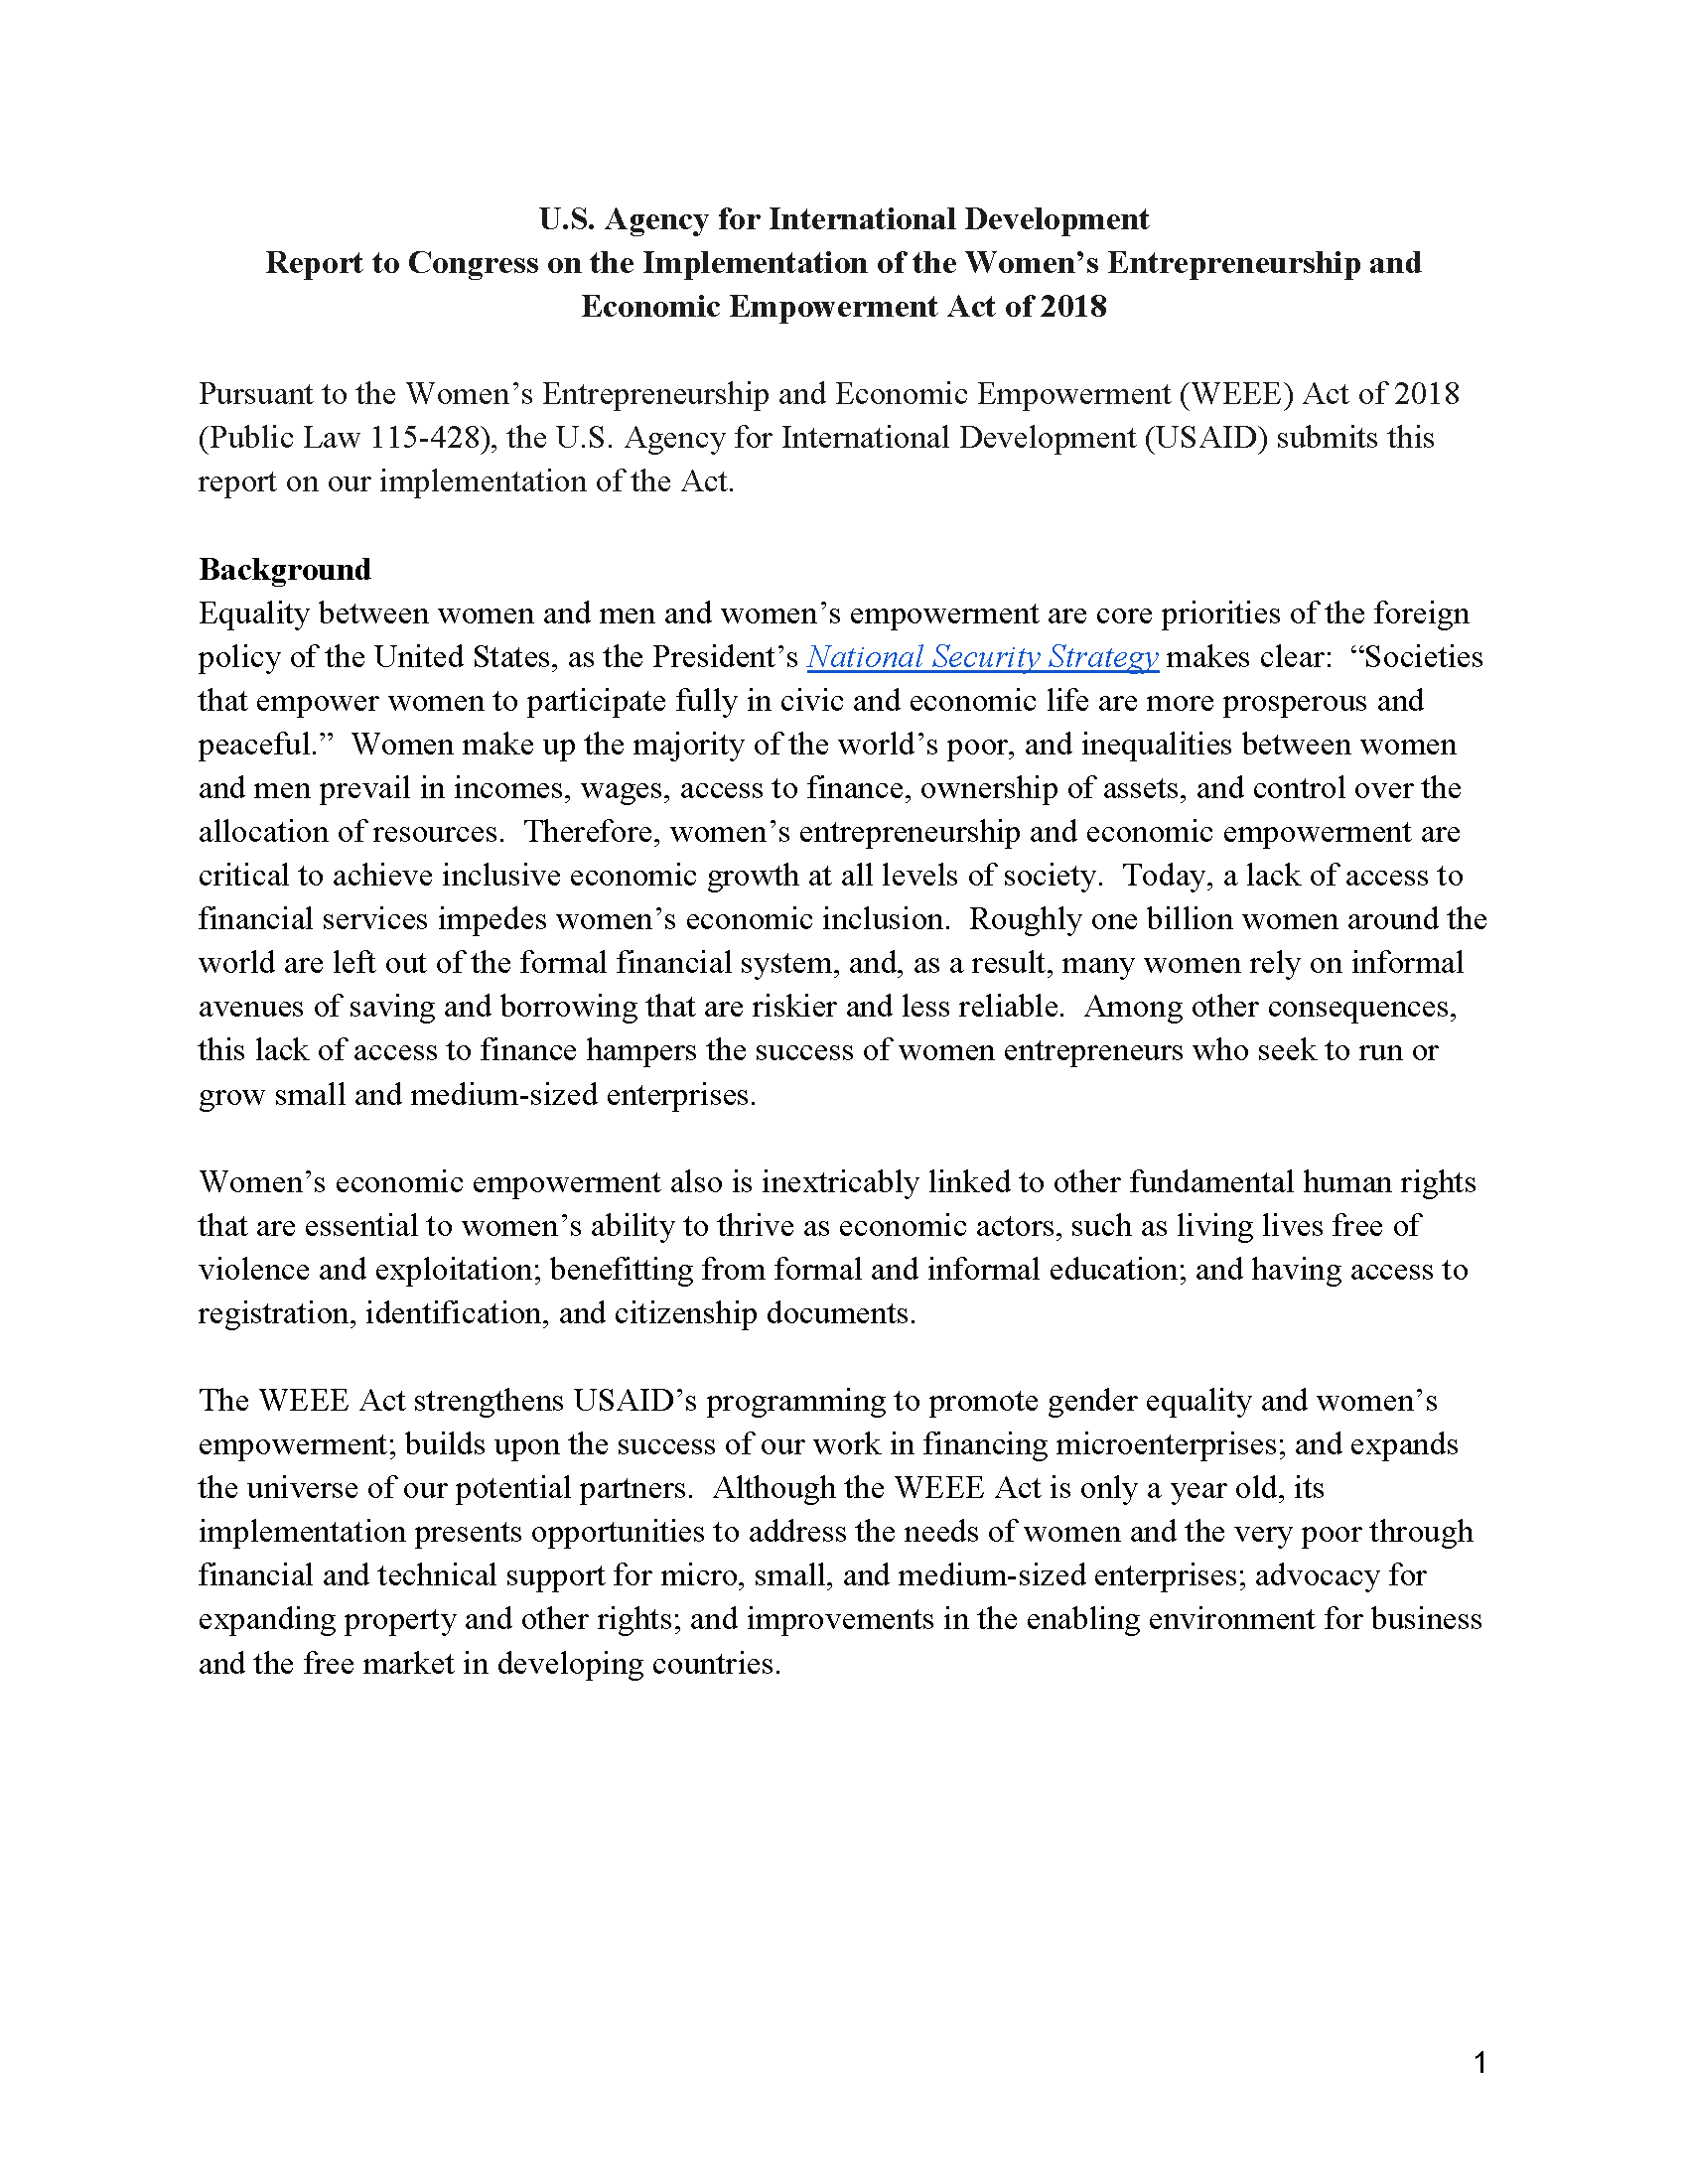 Report to Congress on the Implementation of the Women’s Entrepreneurship and Economic Empowerment Act of 2018